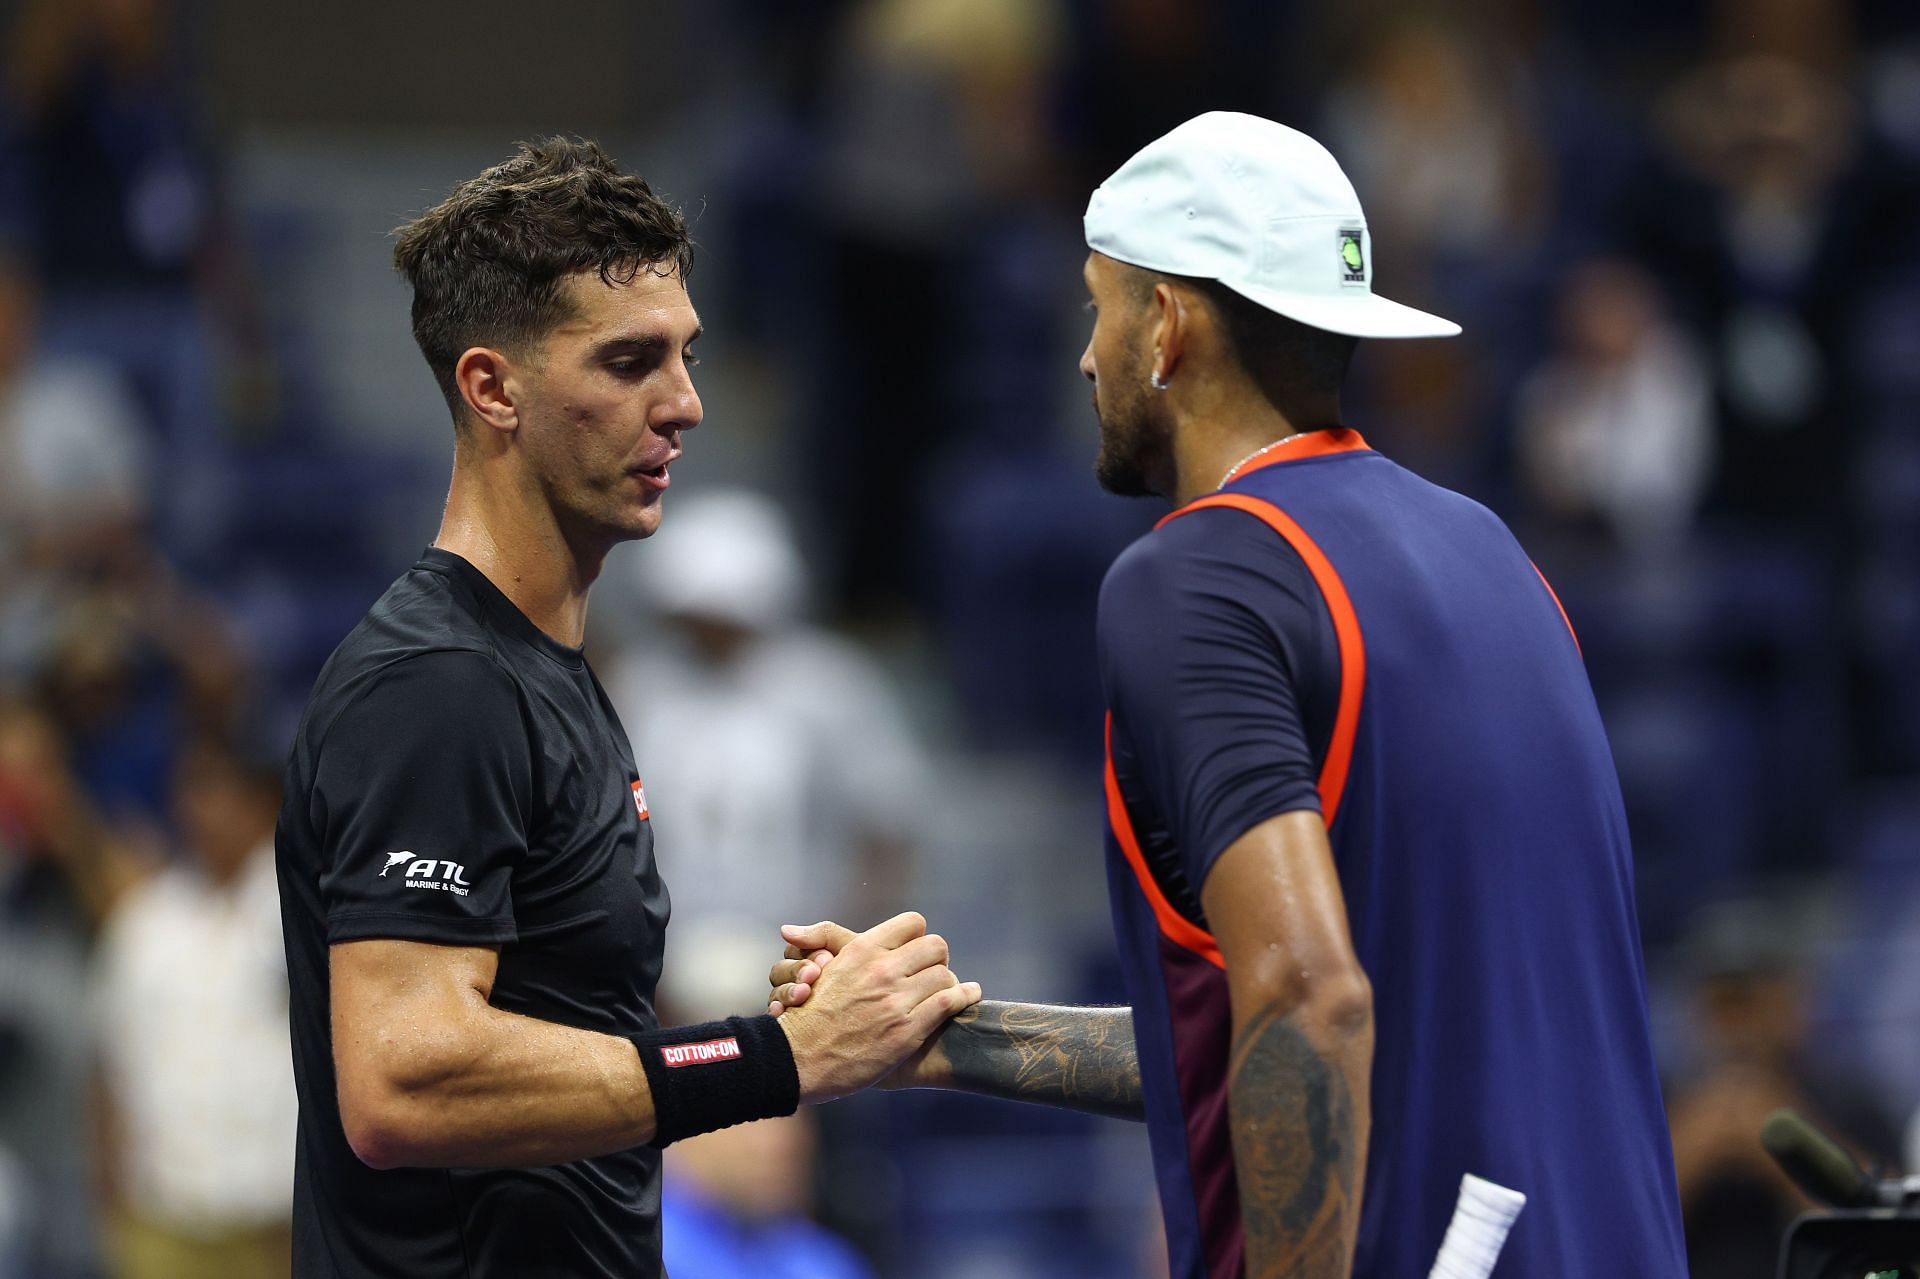 Nick Kyrgios went head-to-head with close friend Thanasi Kokkinakis at the 2022 US Open.